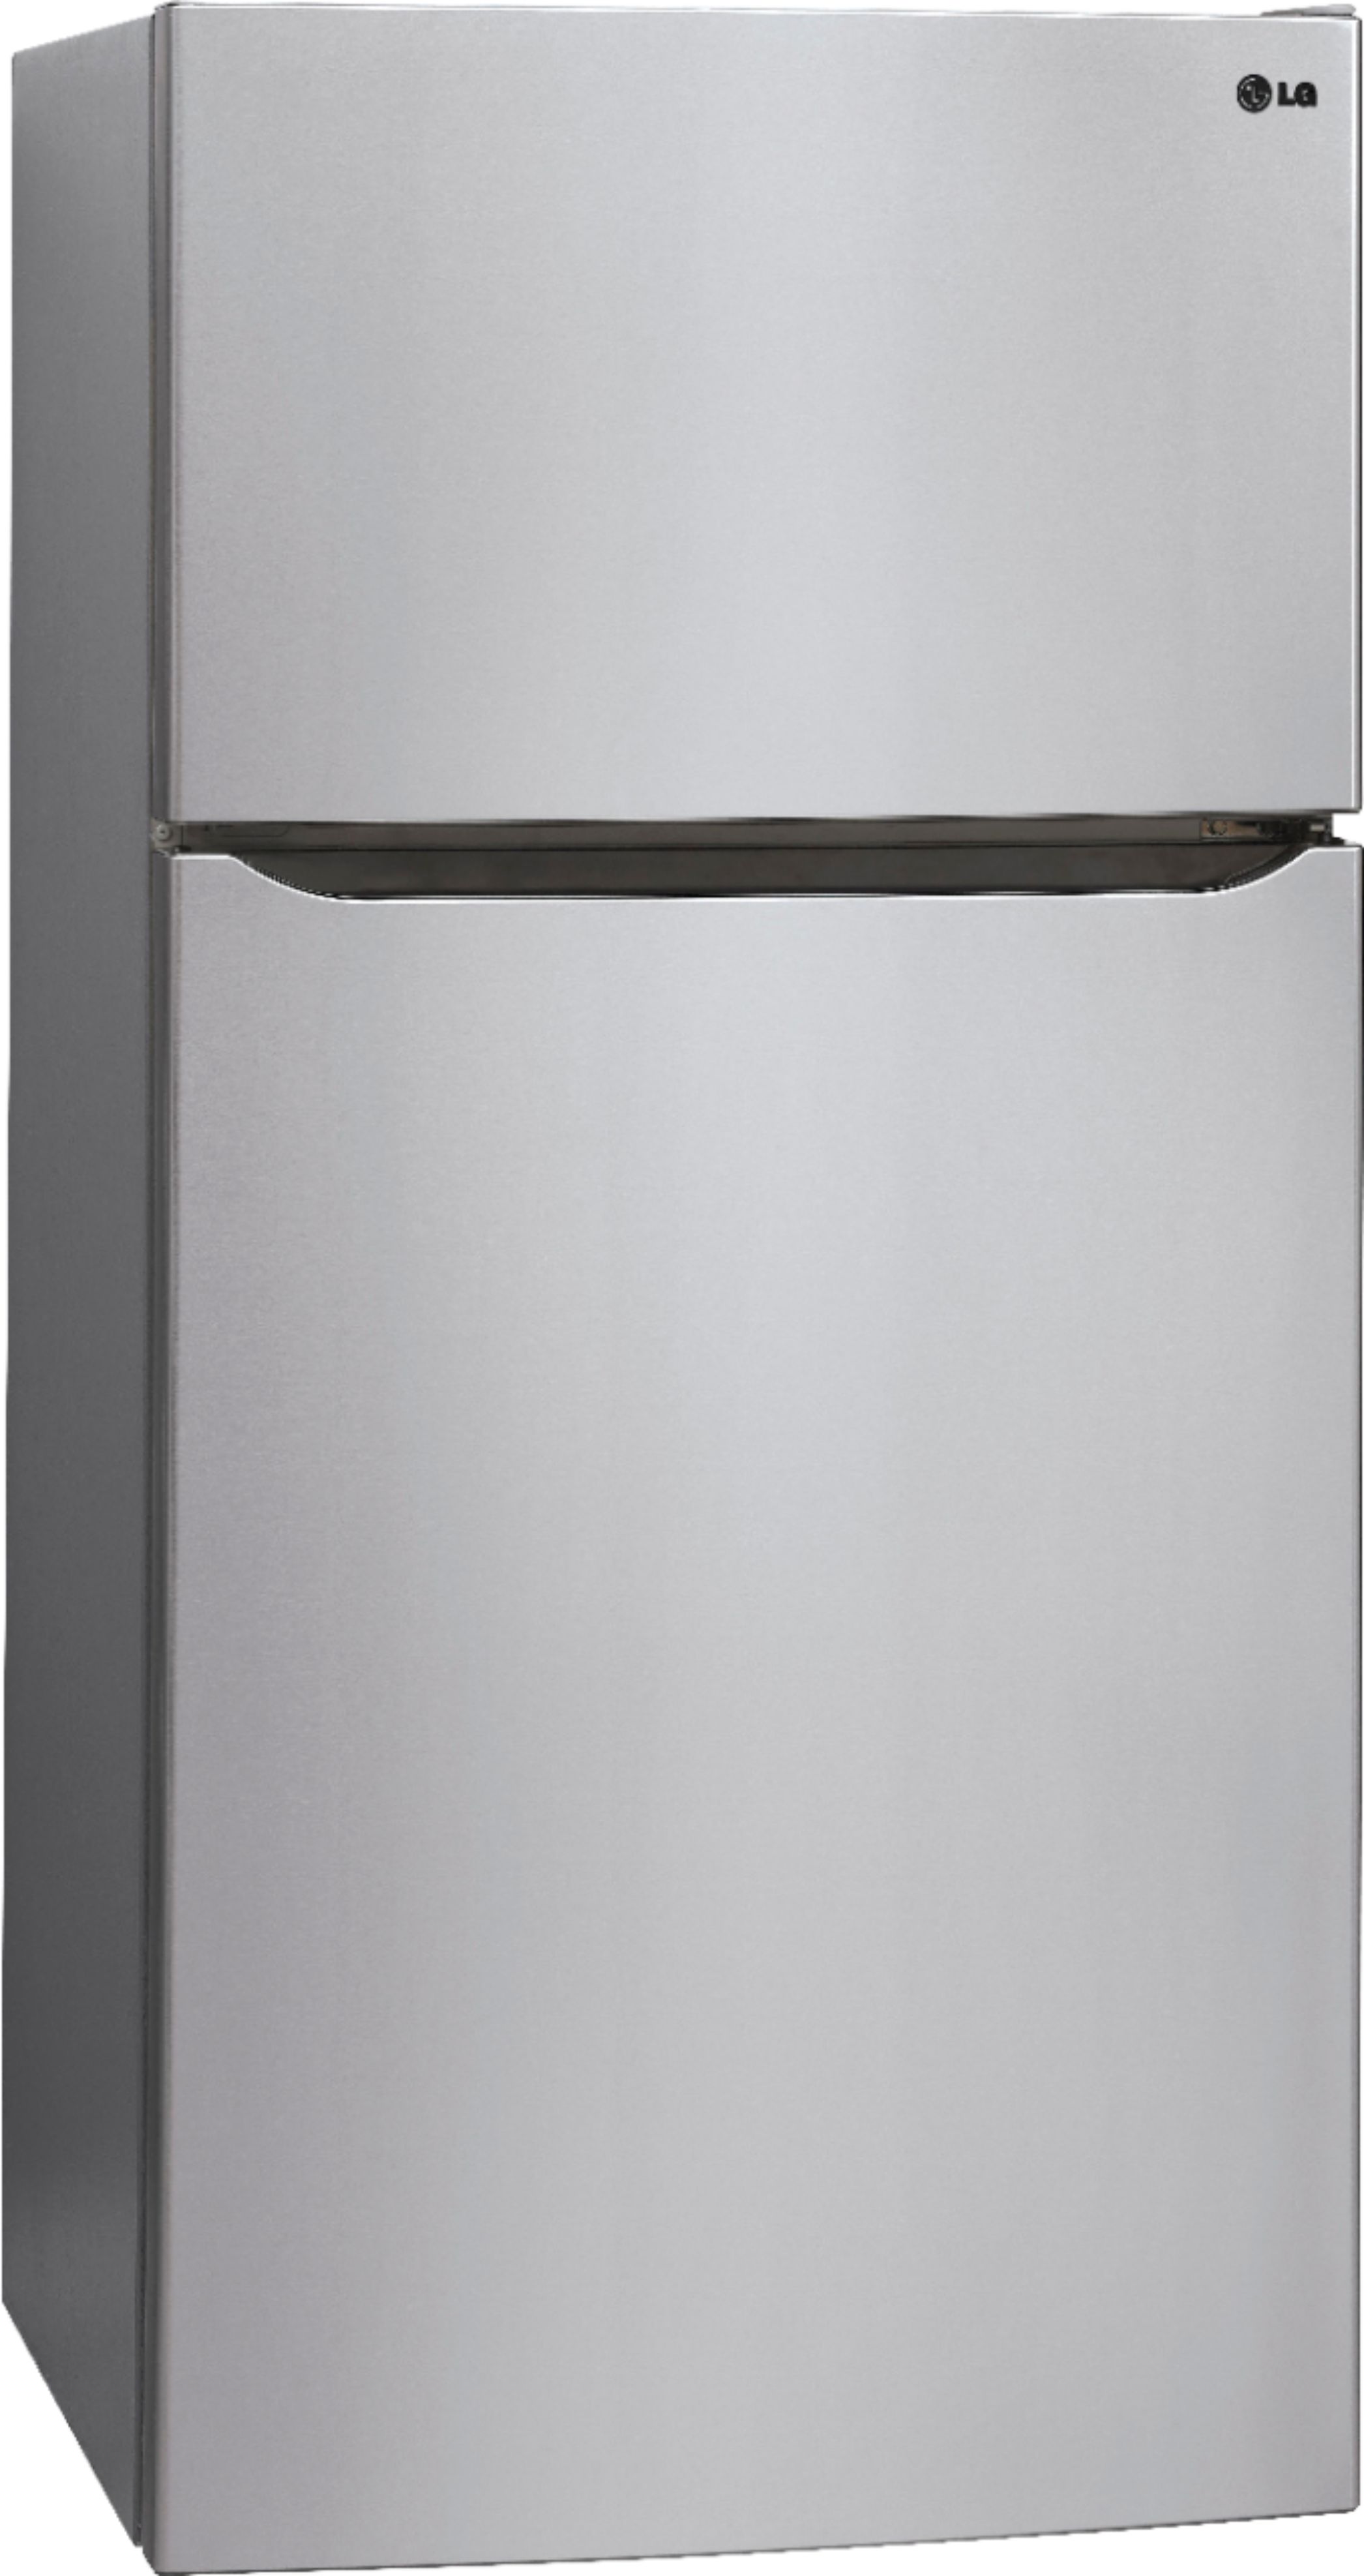 Angle View: LG - 23.8 Cu. Ft. Top-Freezer Refrigerator - Stainless steel